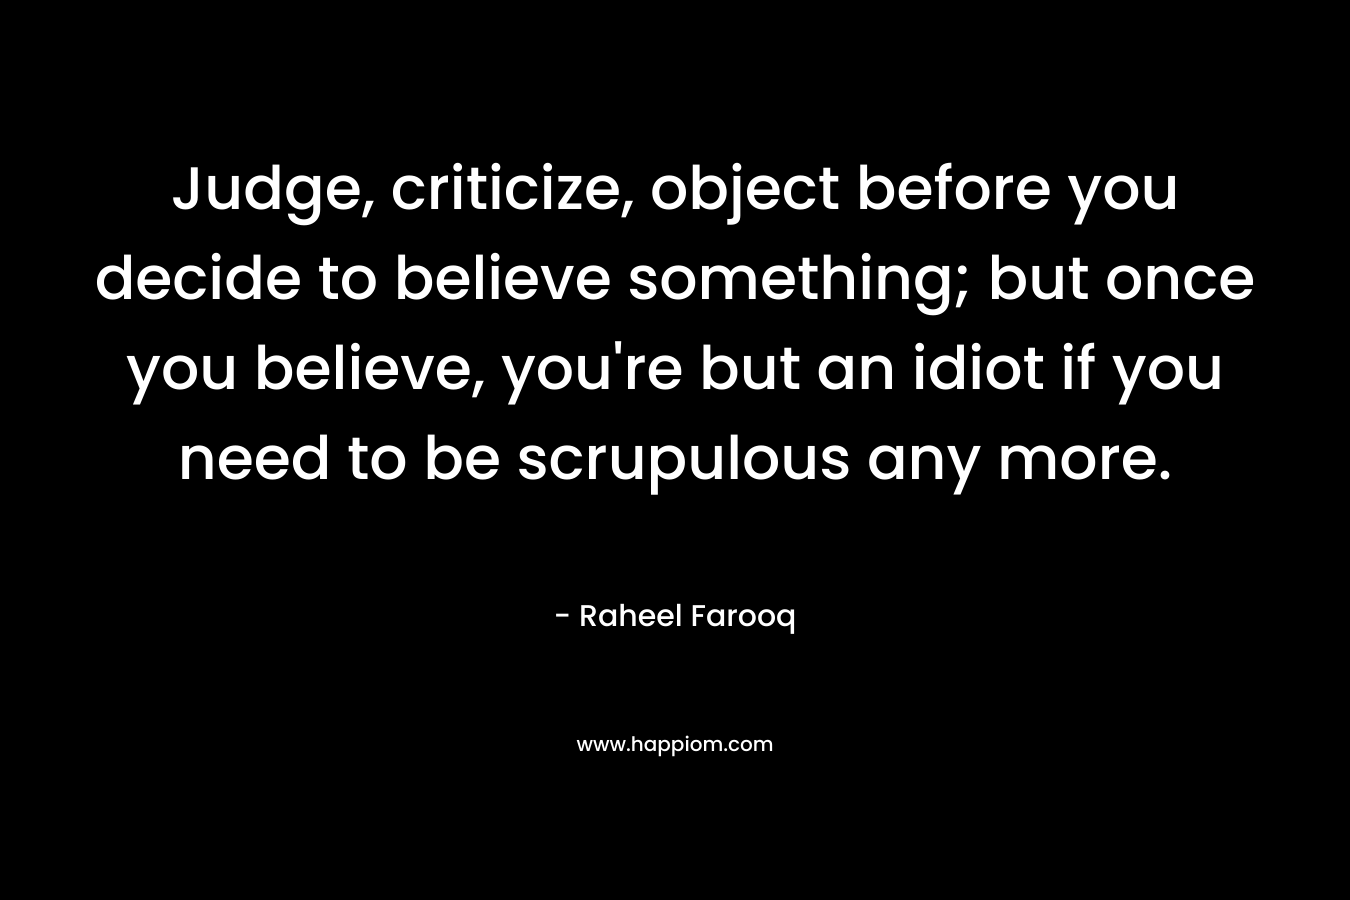 Judge, criticize, object before you decide to believe something; but once you believe, you're but an idiot if you need to be scrupulous any more.